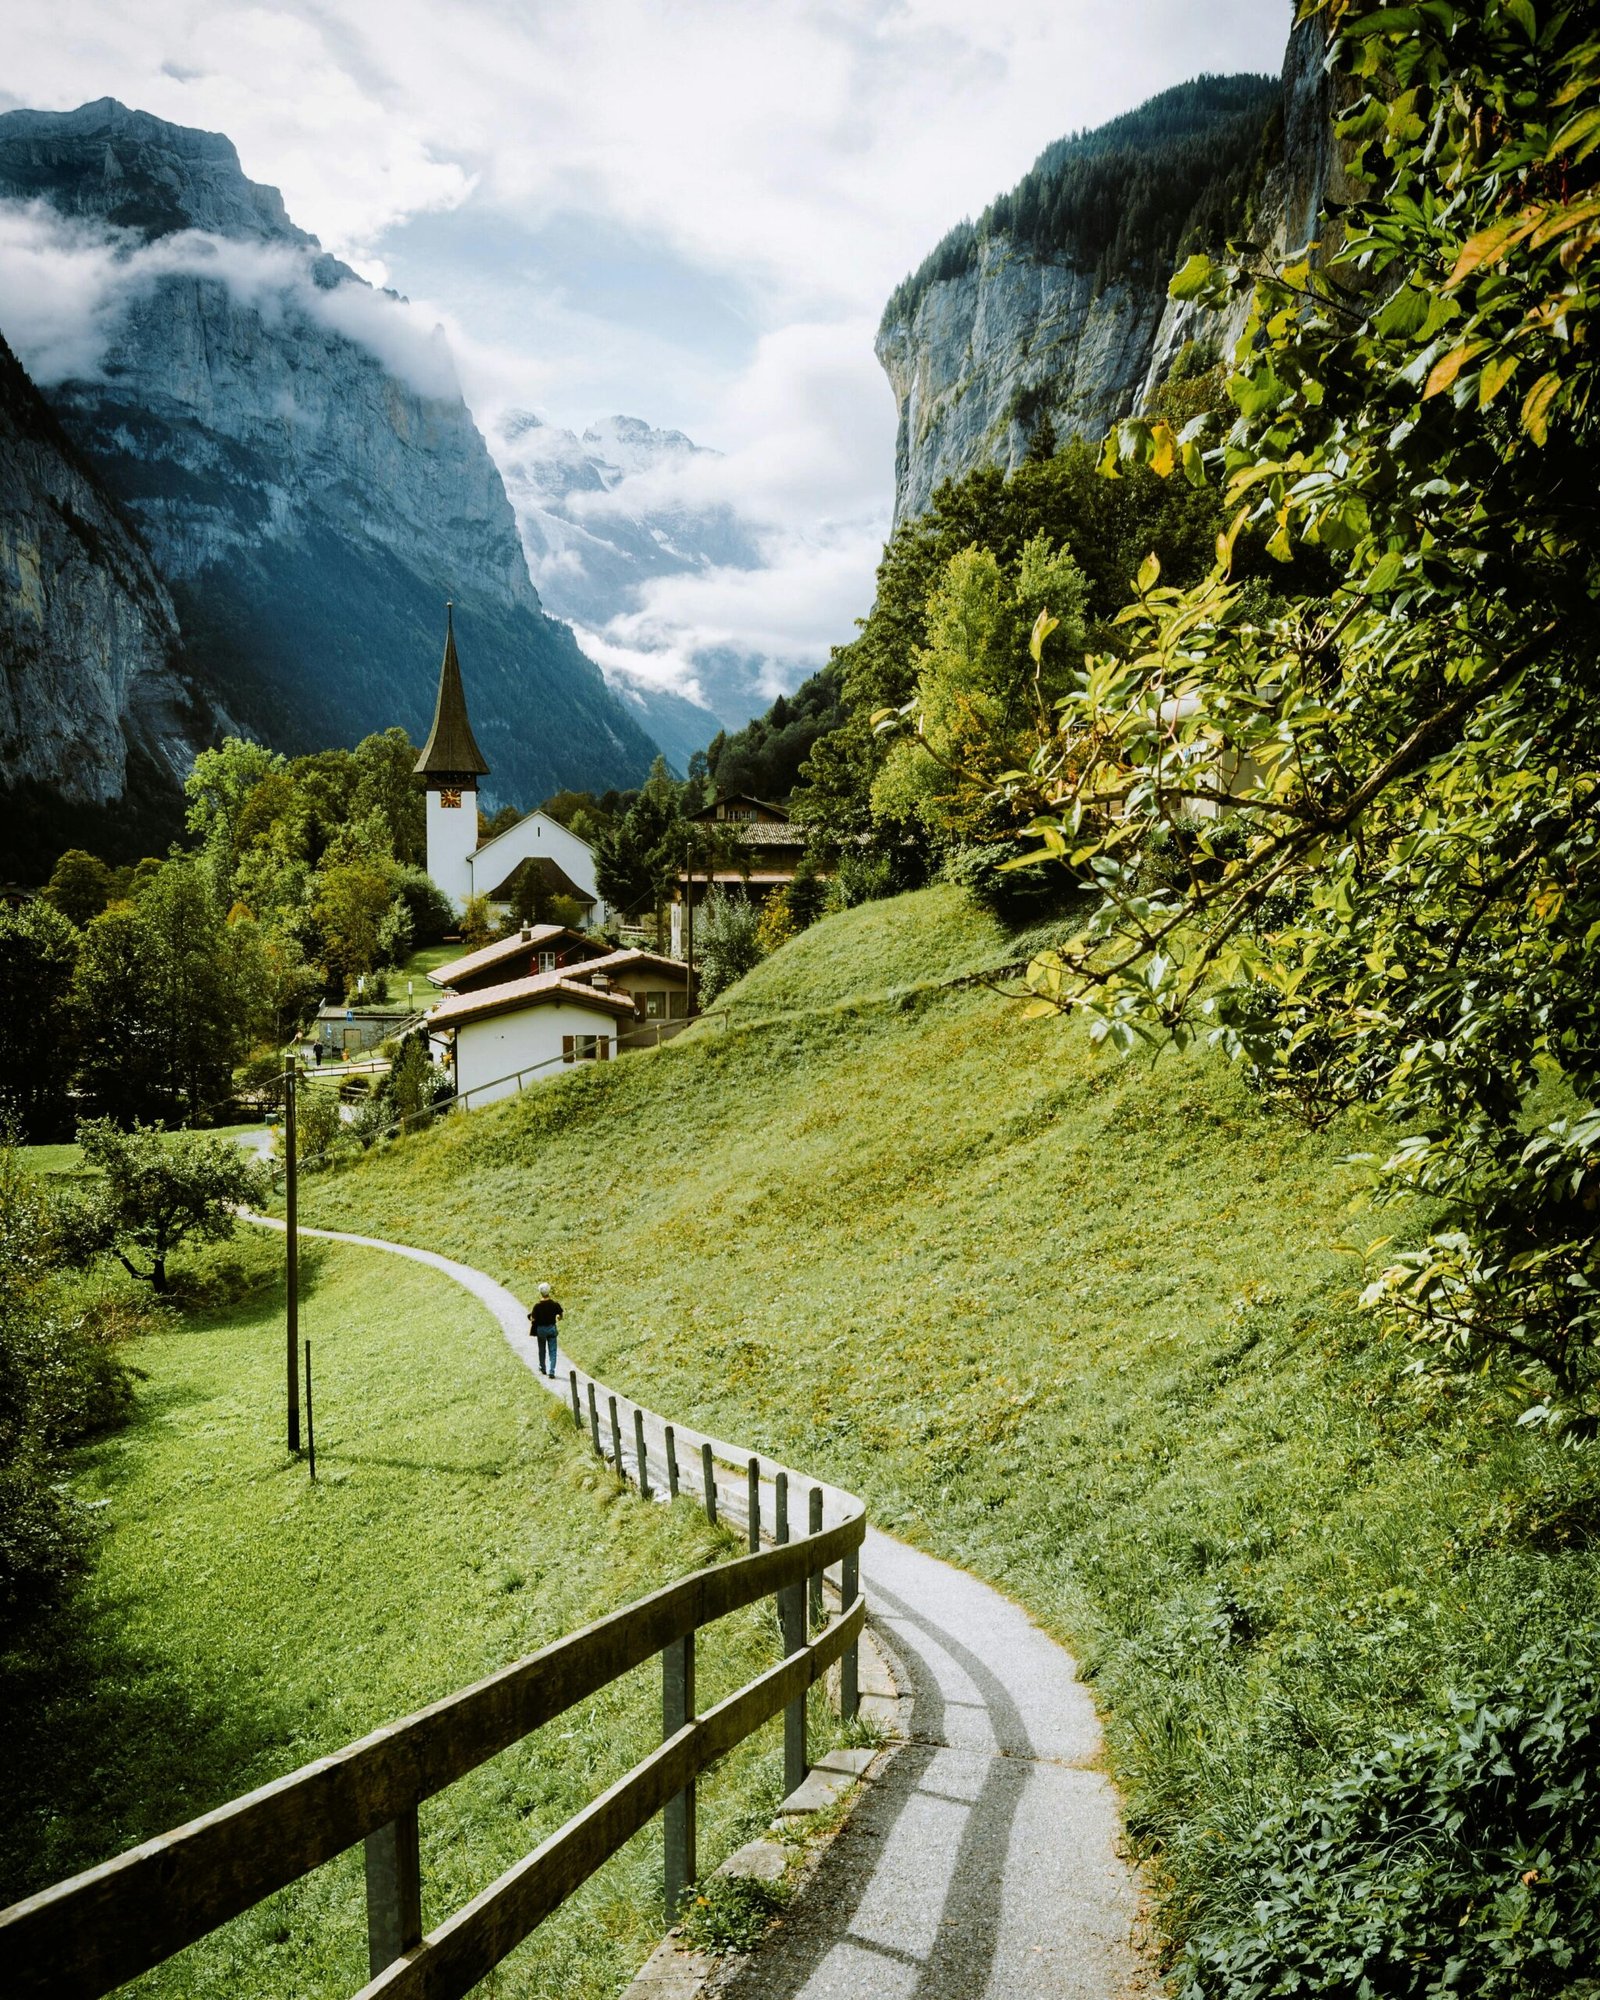 Switzerland – Why It’s the Most Beautiful Country in the World